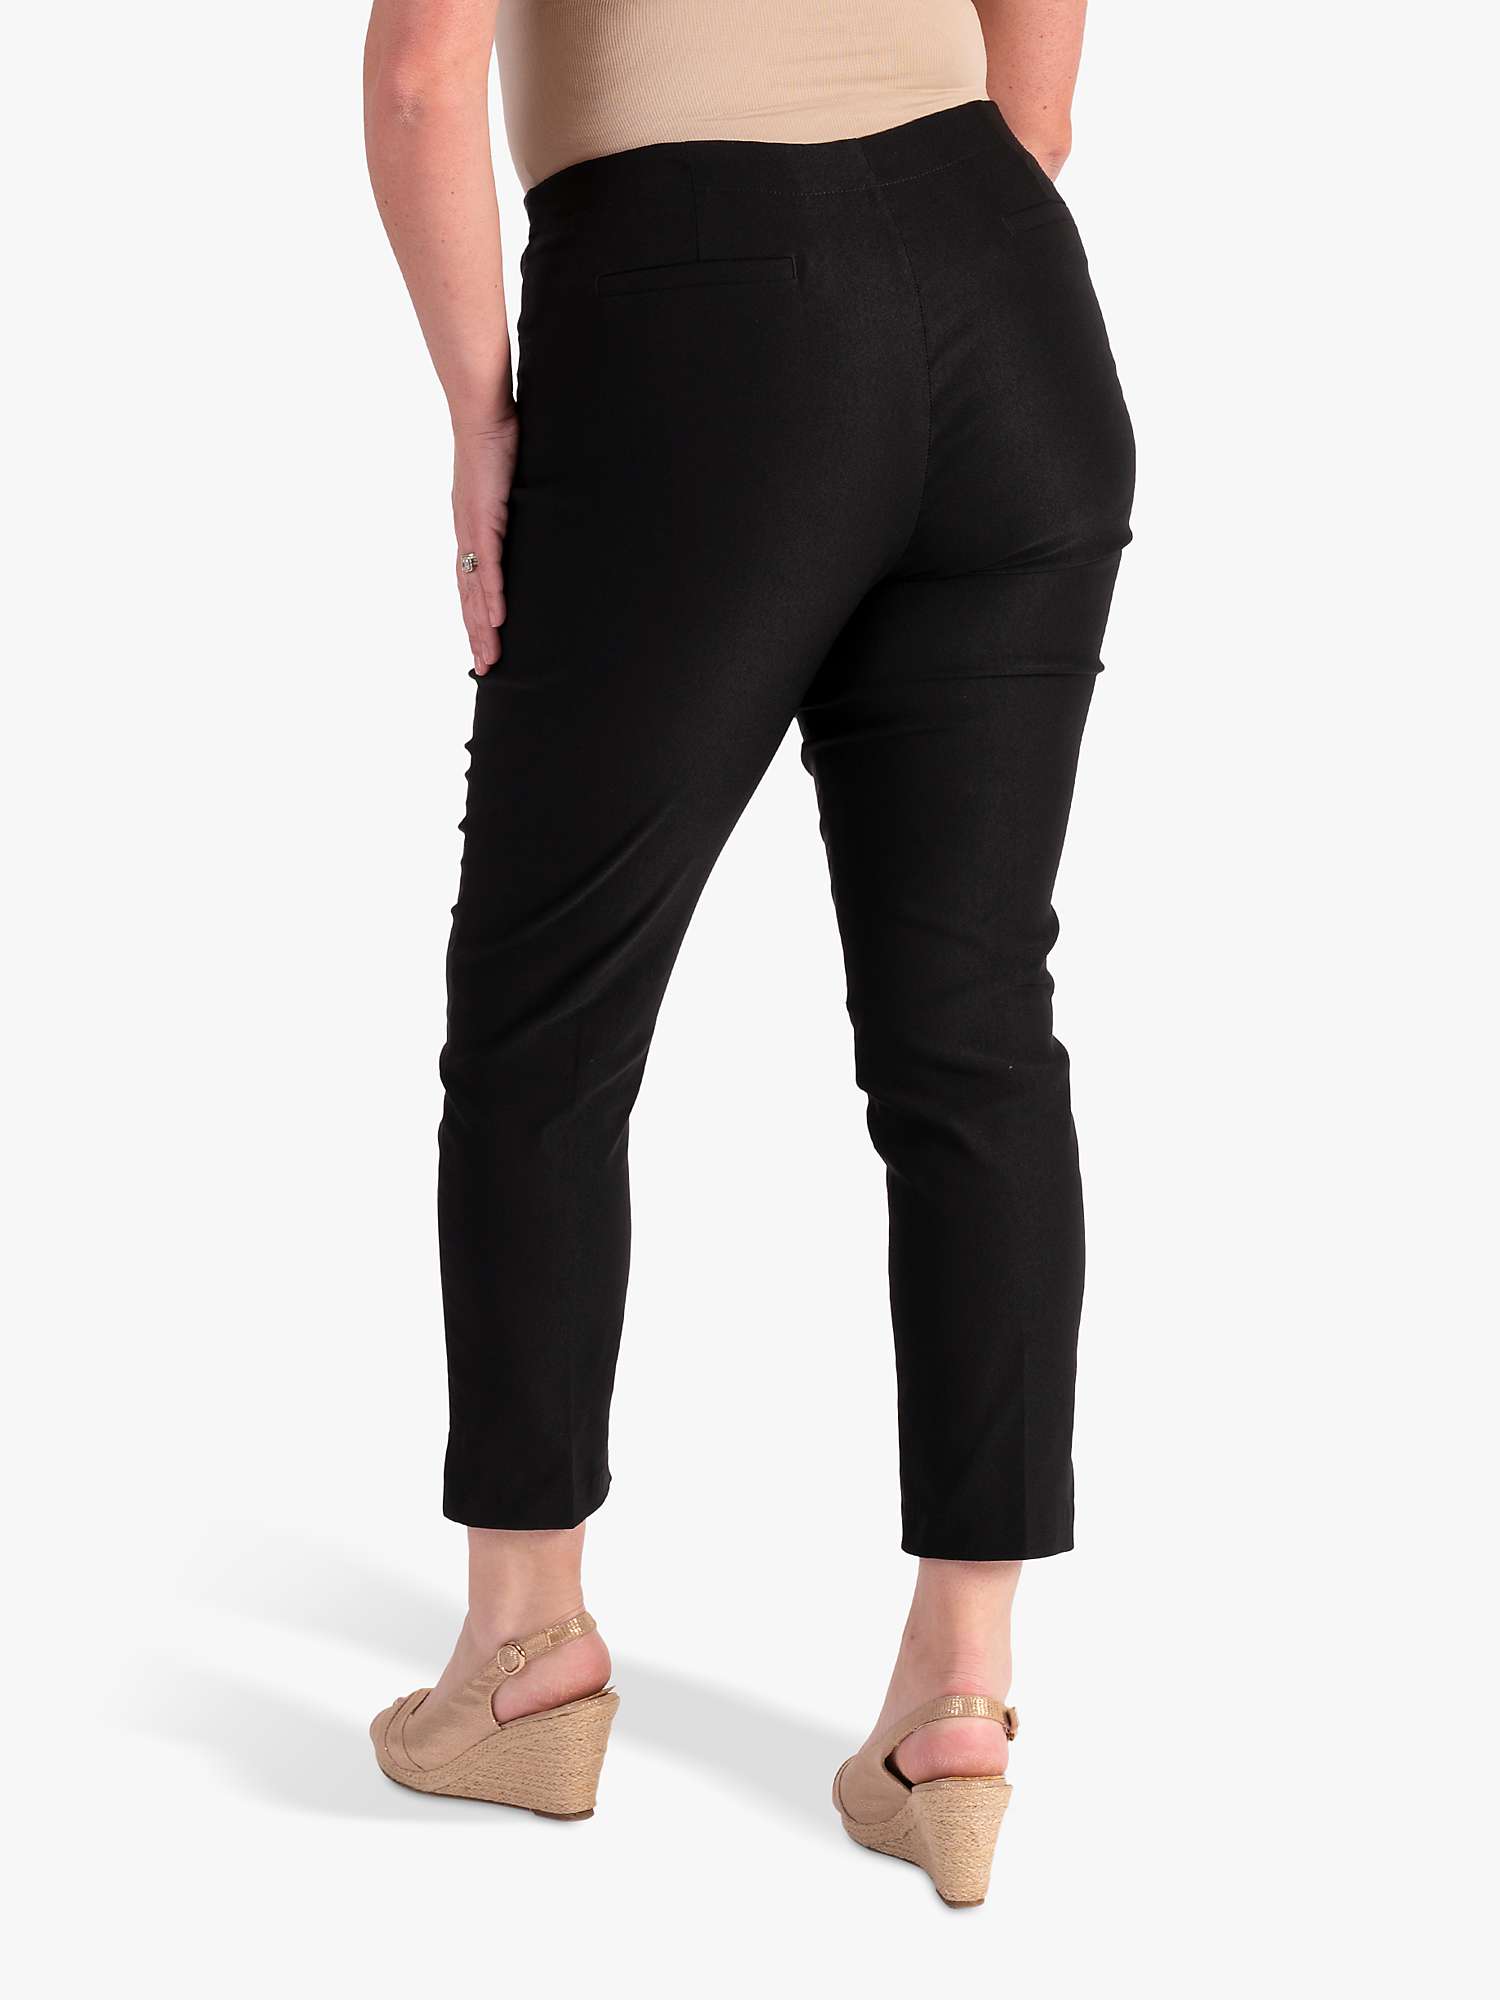 Buy chesca Slim Leg Trousers Online at johnlewis.com